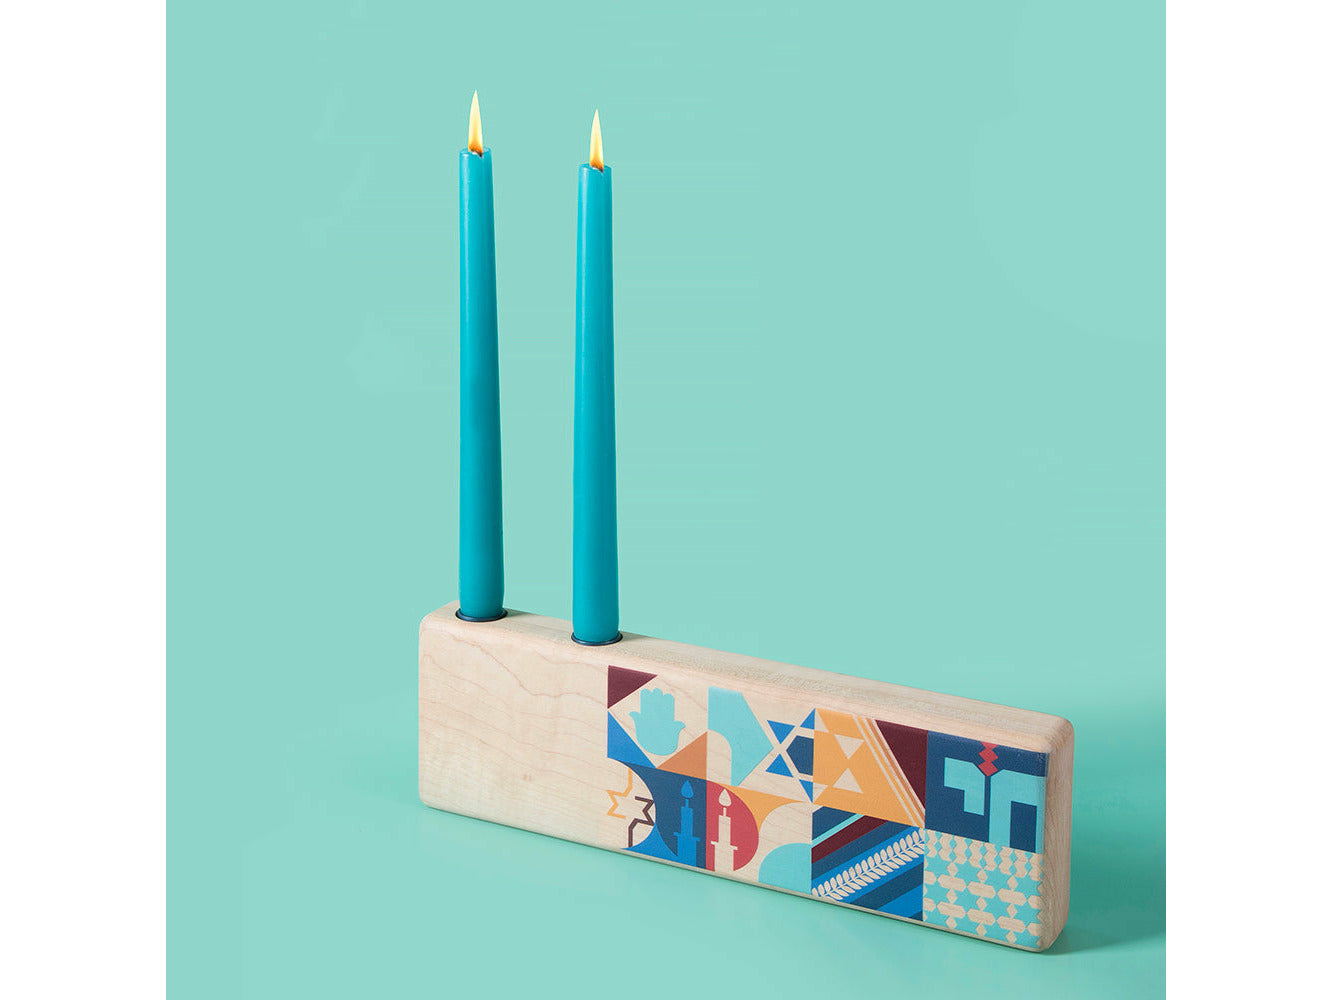 Wooden Candle Holders with Chai Graphic Design